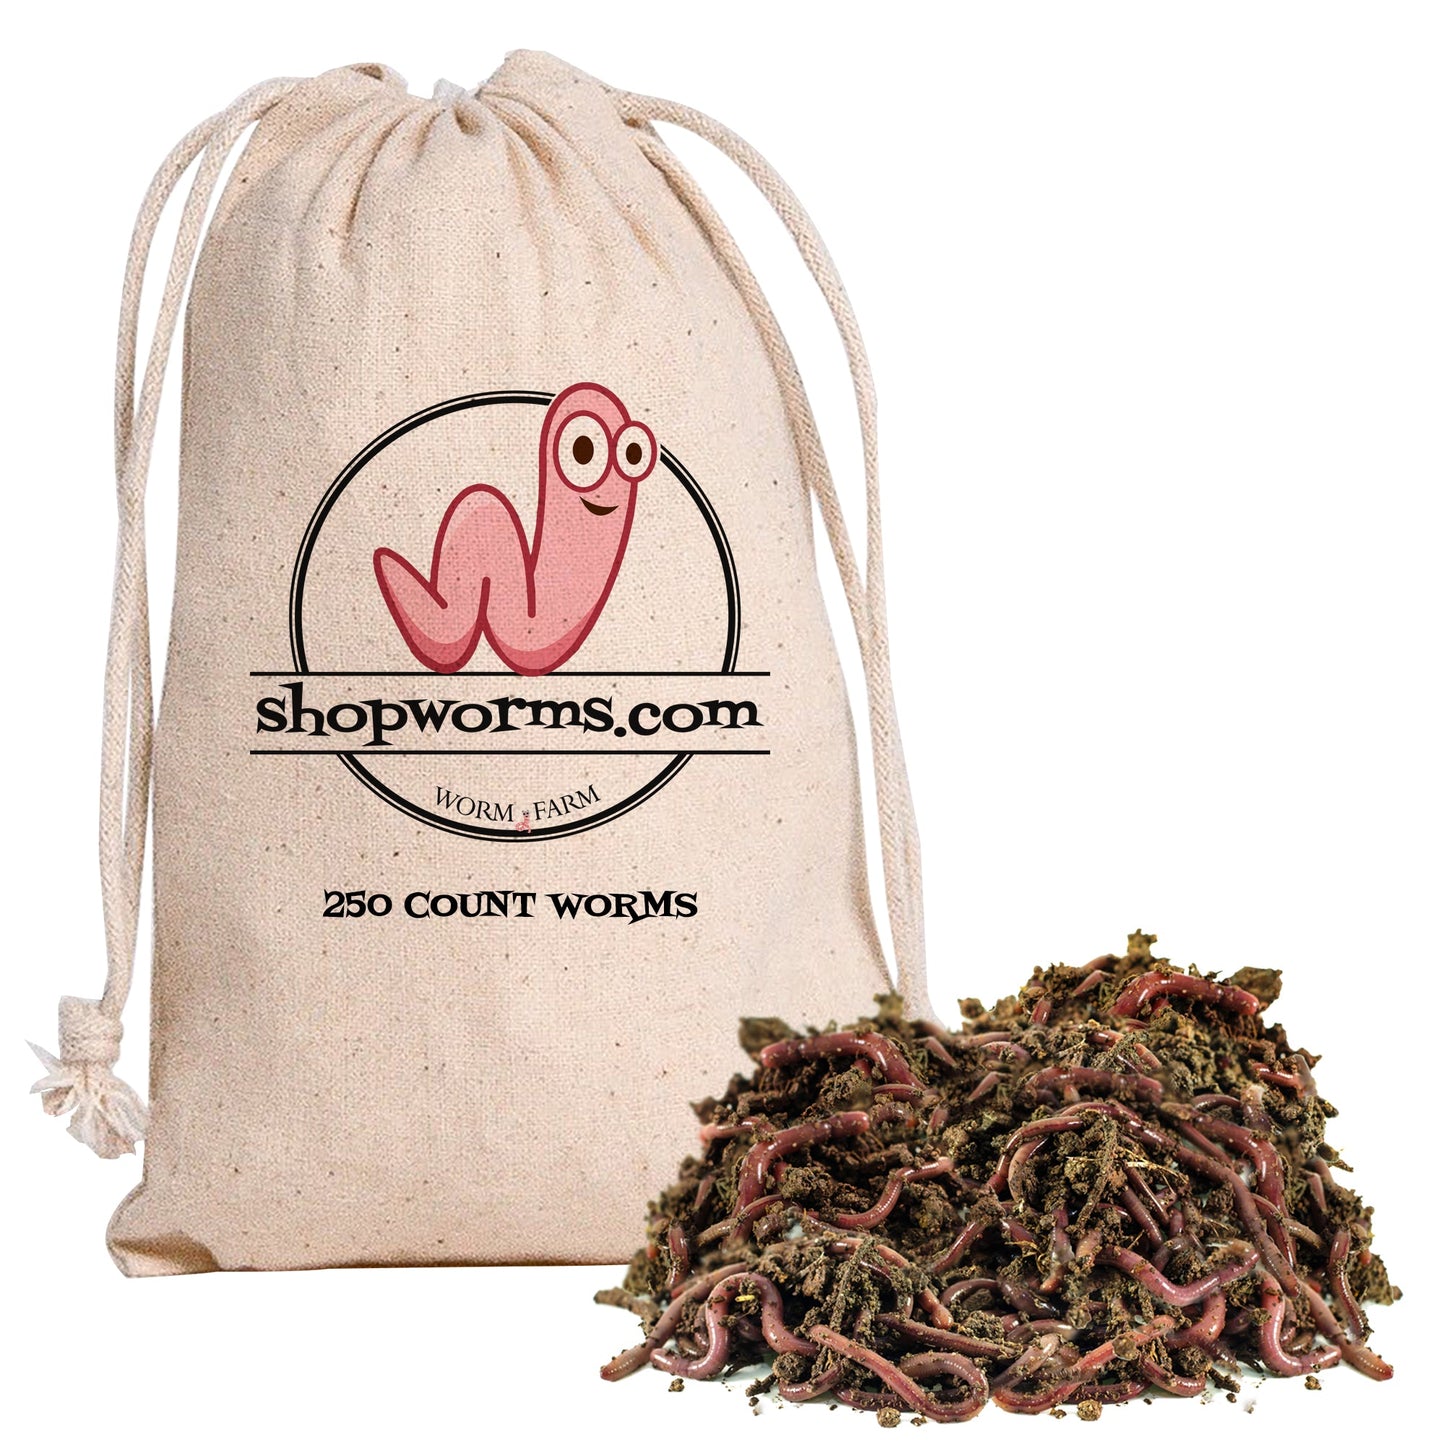  WWJD Worms Red Wigglers Composting Worms - 1/4lb (250 Count) -  Red Wiggler Worm Farm for Fishing, Red Worms for Composting Bin, Red  Composting Worms for Garden, Farm Soil 